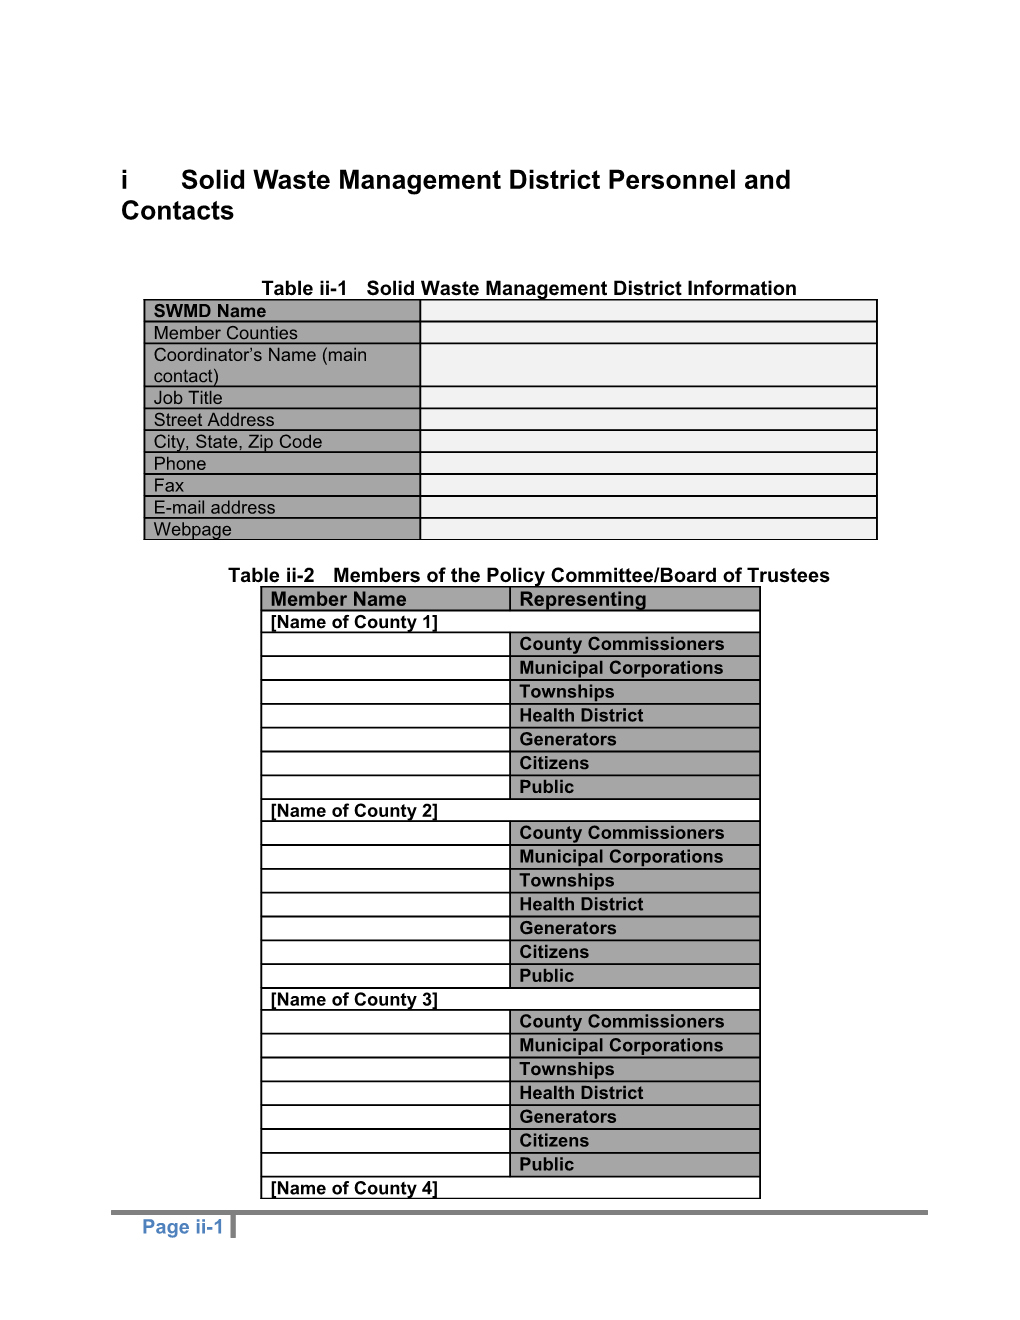 I Solid Waste Management District Personnel and Contacts